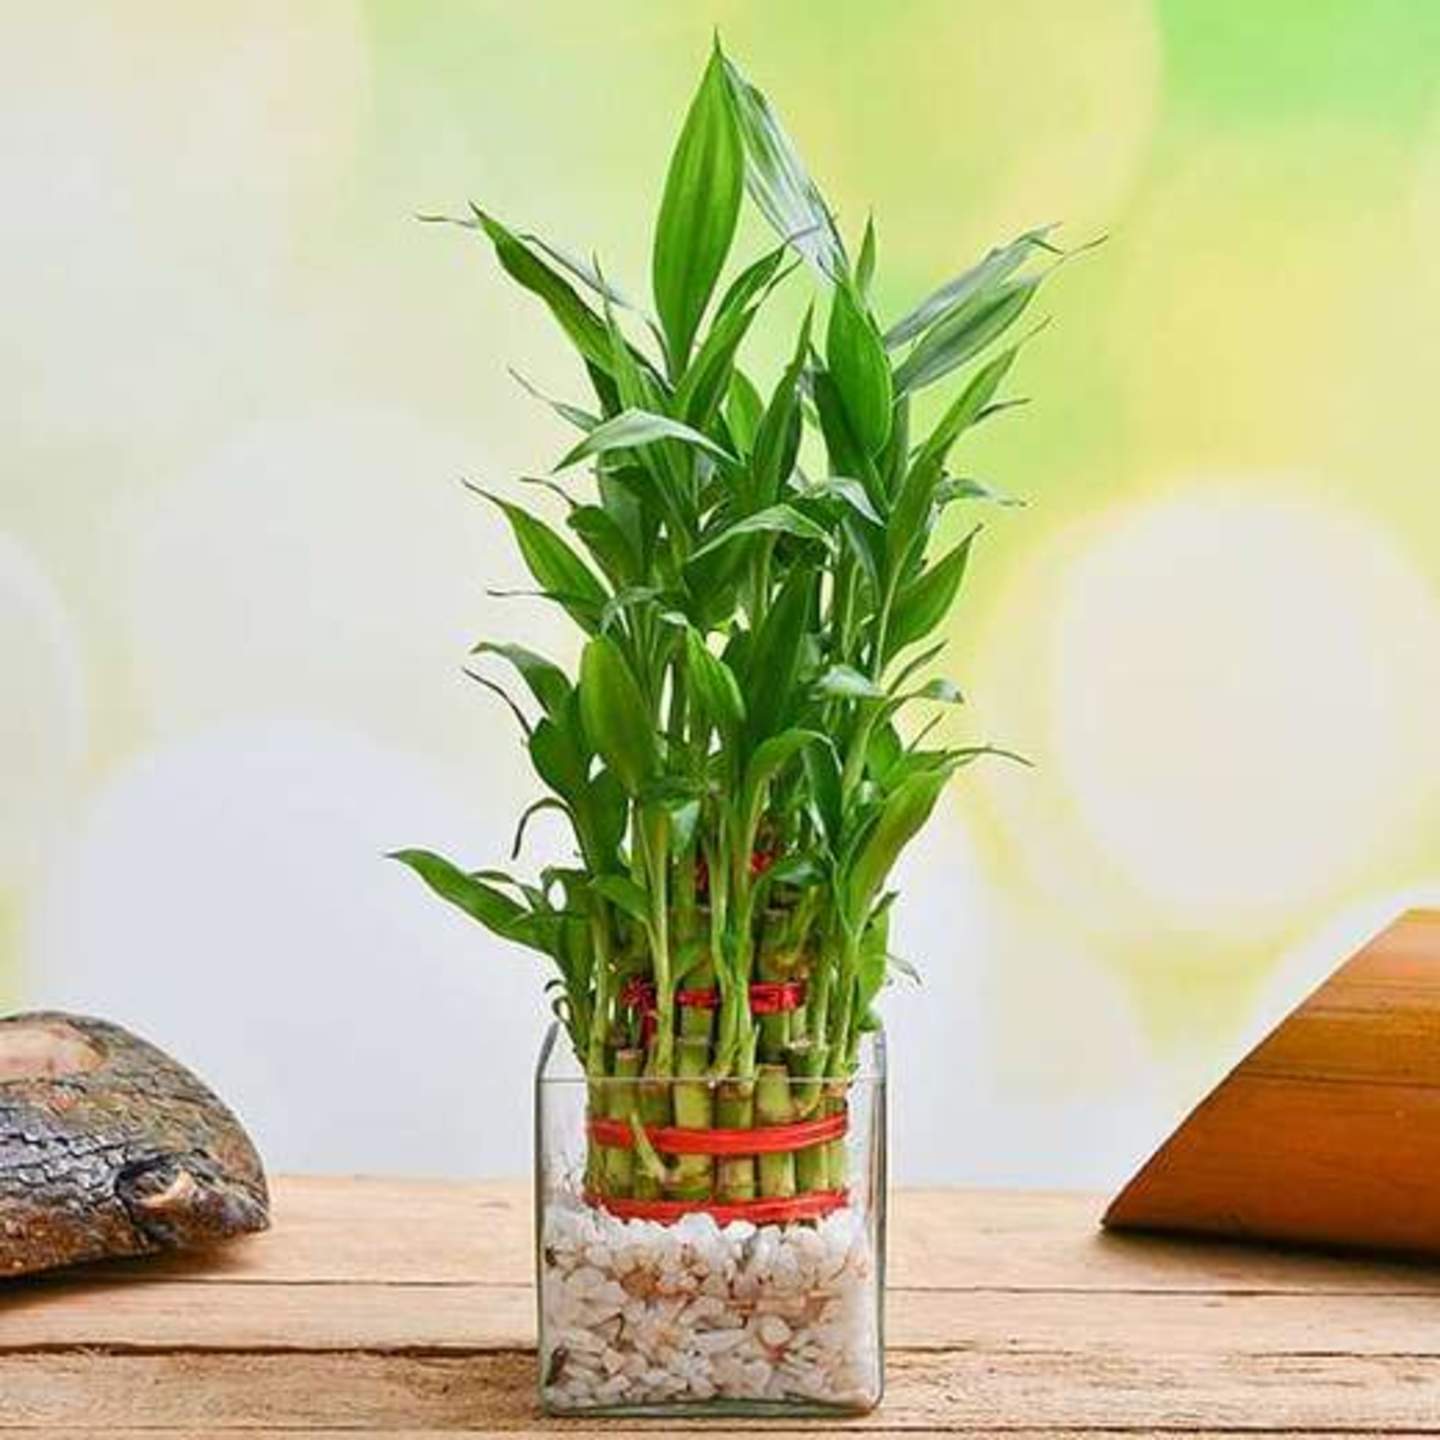  3 Layer Lucky bamboo in Glass Vase with Pebbles